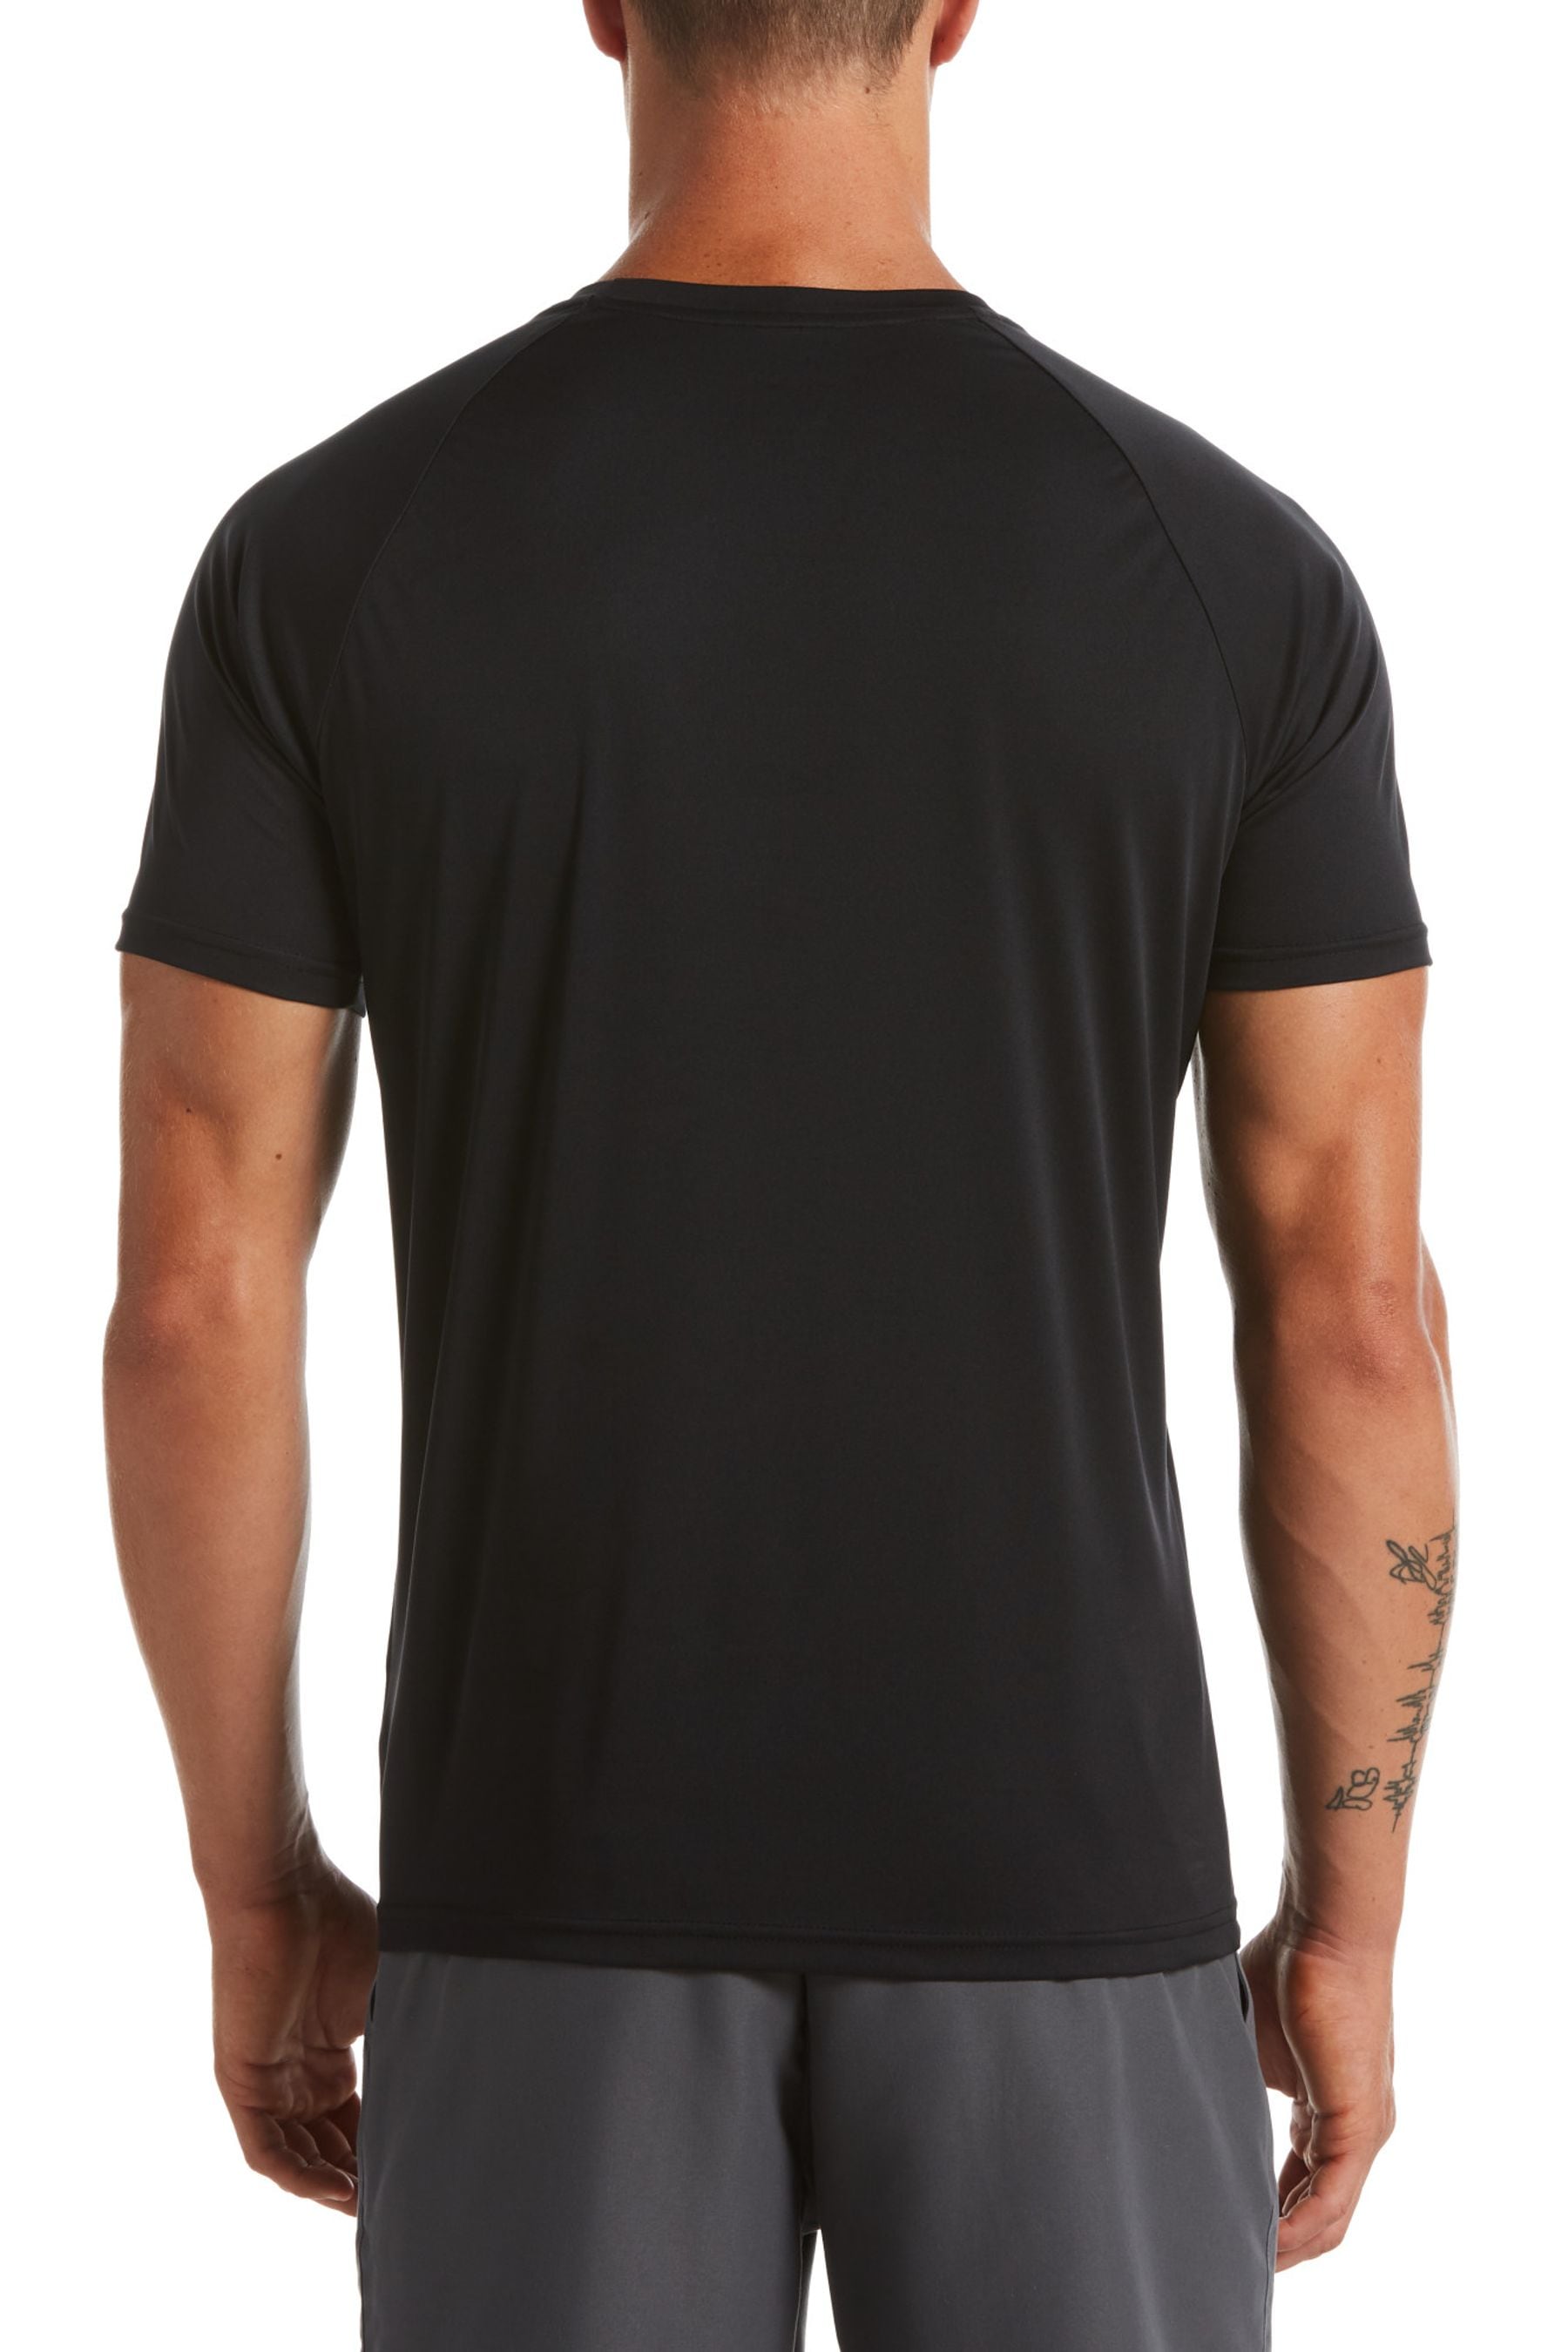 Buy Nike Black Short Sleeve Hydroguard Sun Safe Top from the Next UK ...